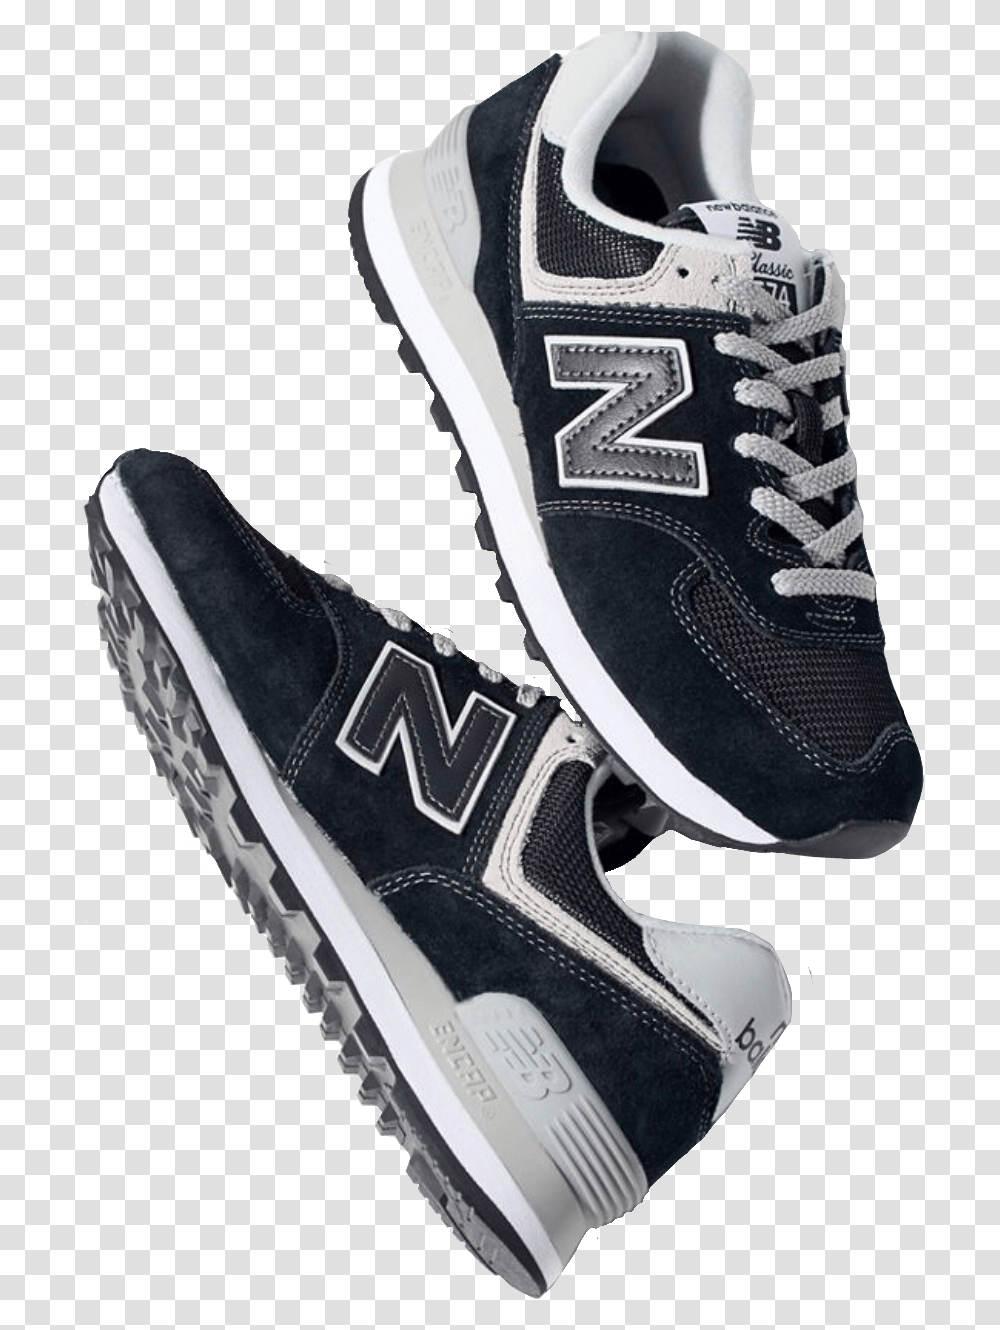 Grey Blue New Balance Shoes In 2020 Tenis New Balance, Clothing, Apparel, Footwear, Running Shoe Transparent Png